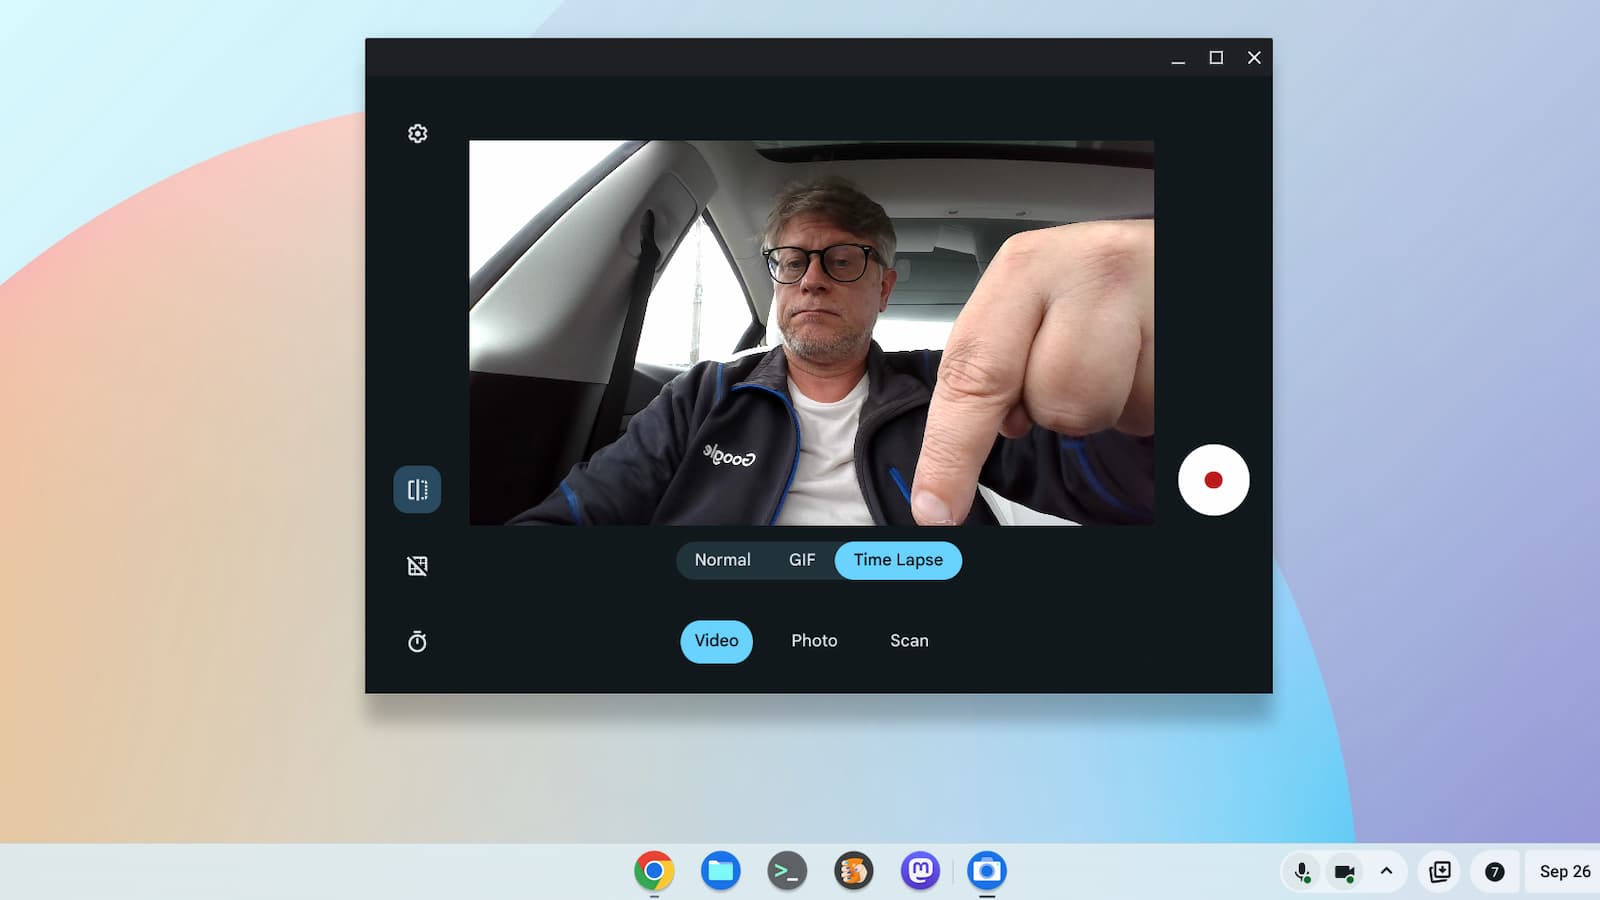 ChromeOS 117 release adds several new Chromebook features